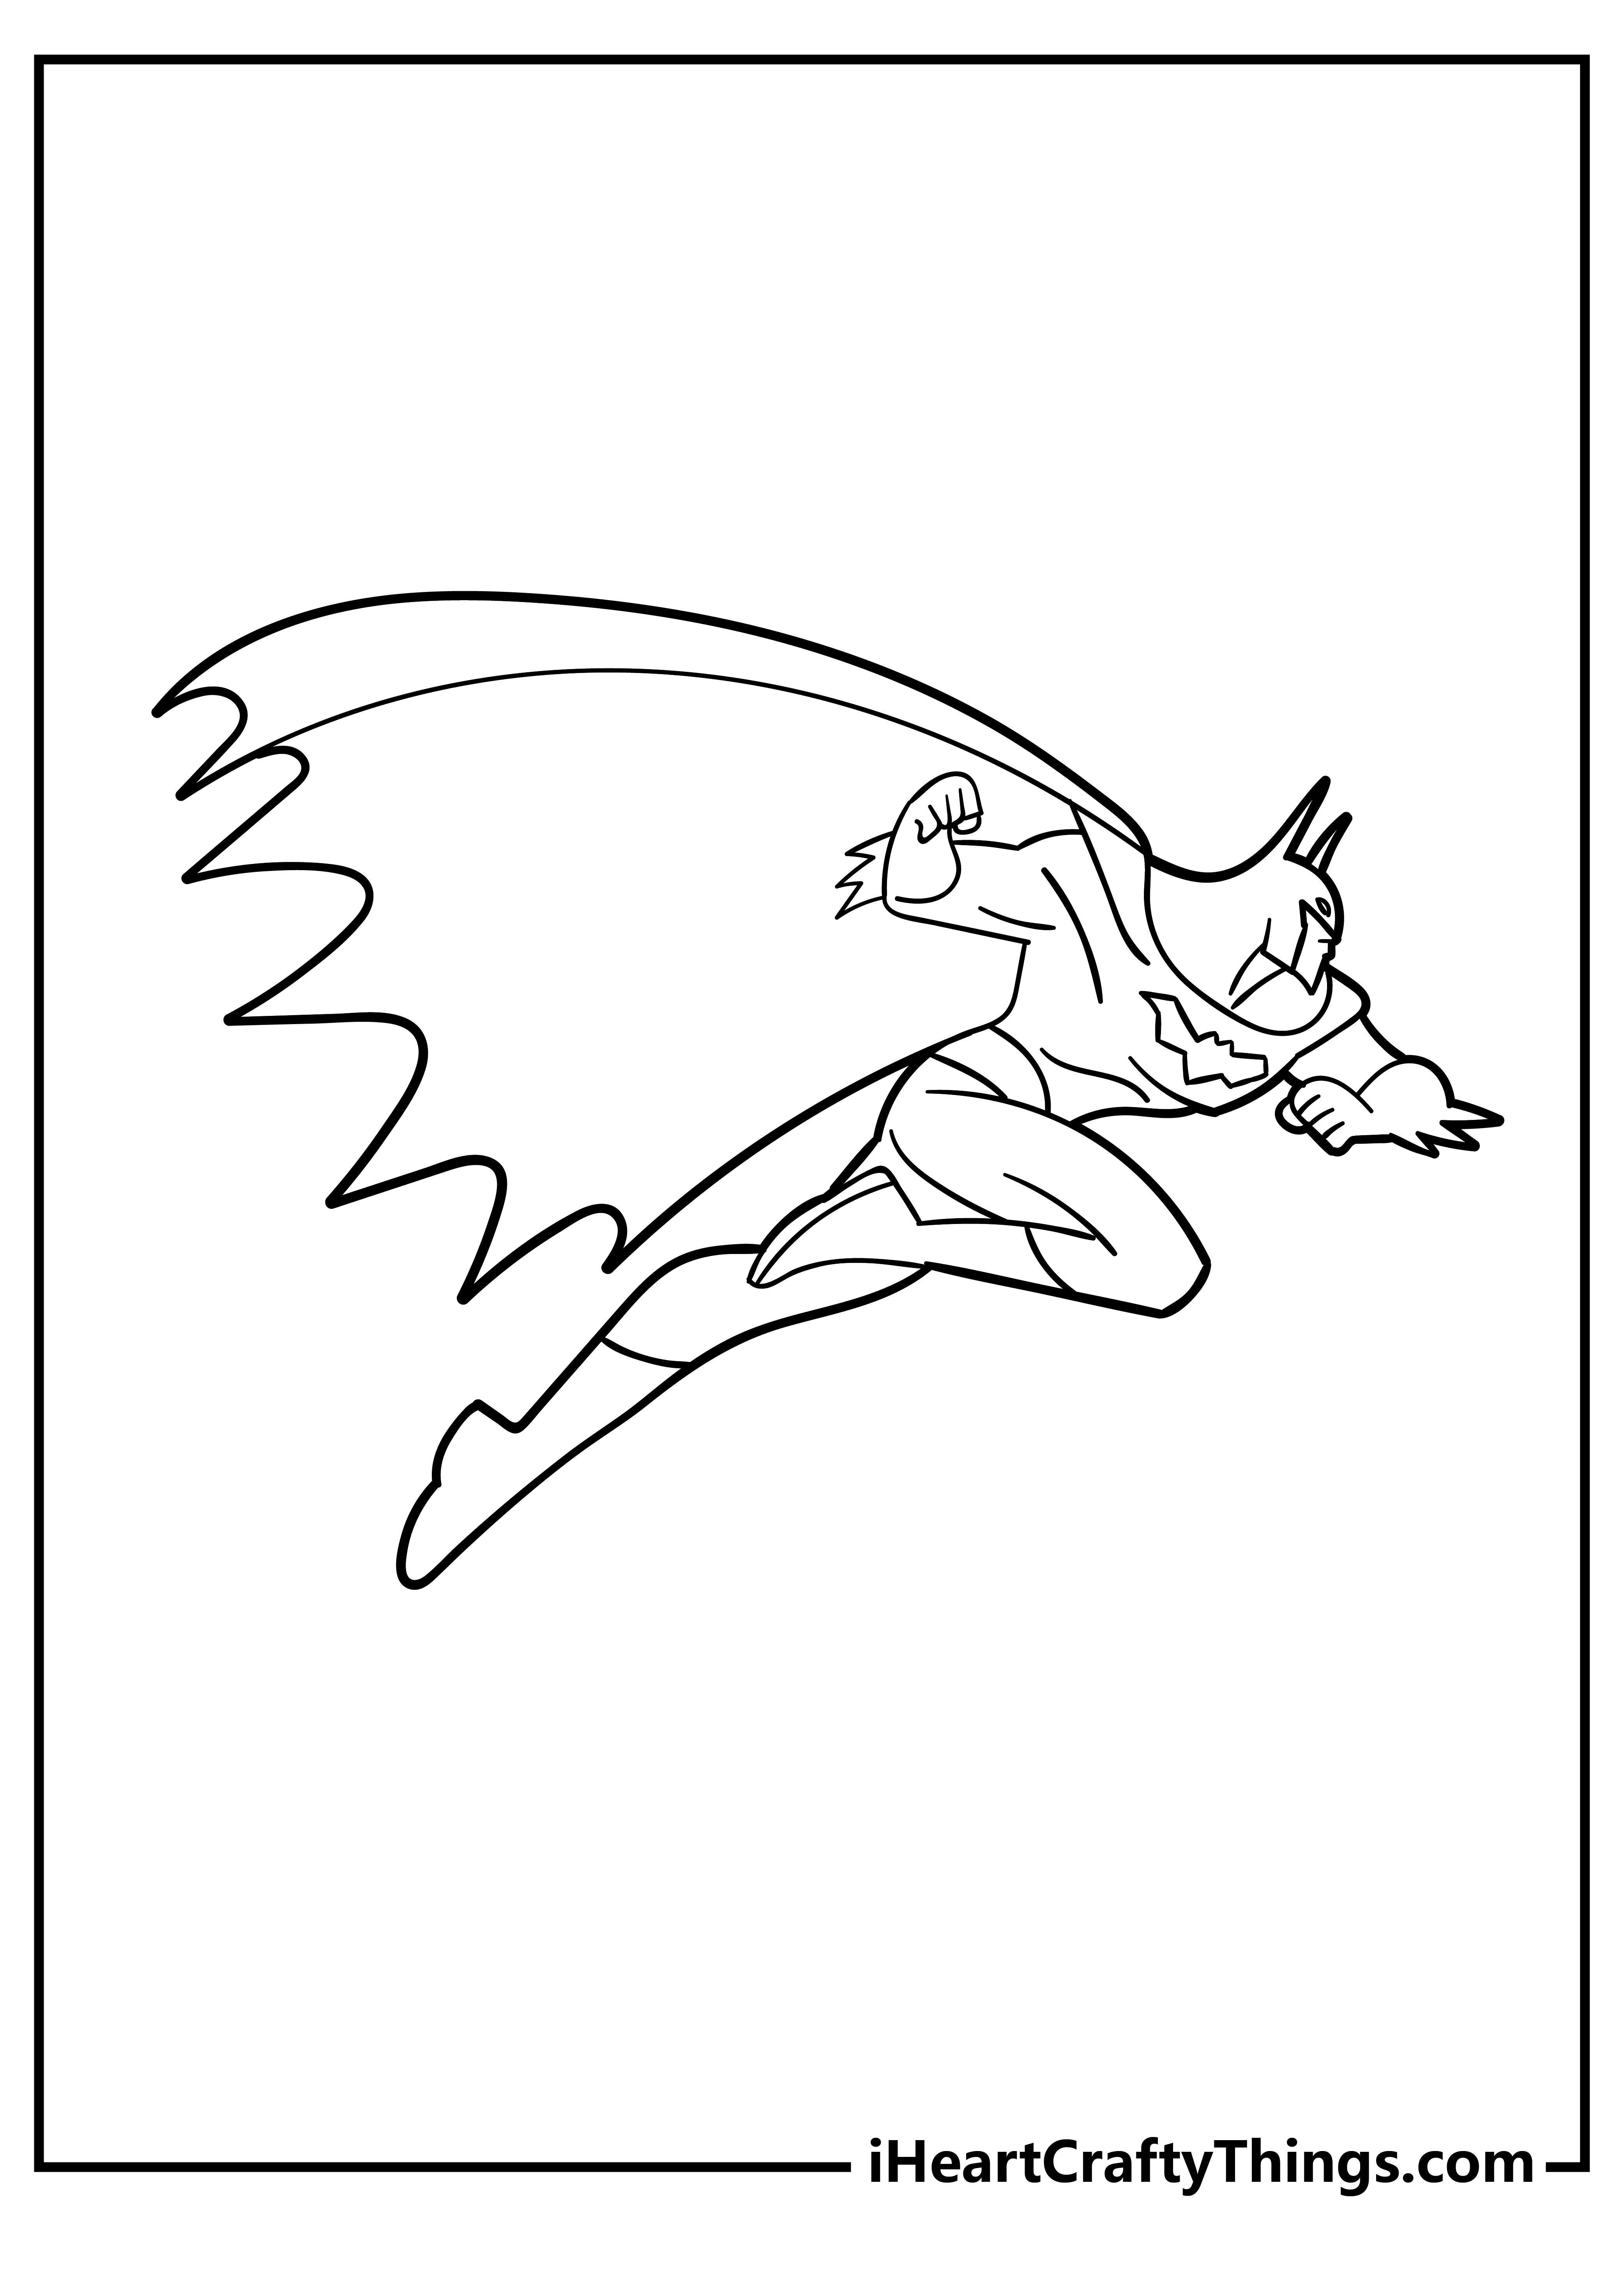 Batman Coloring Pages for preschoolers free printable